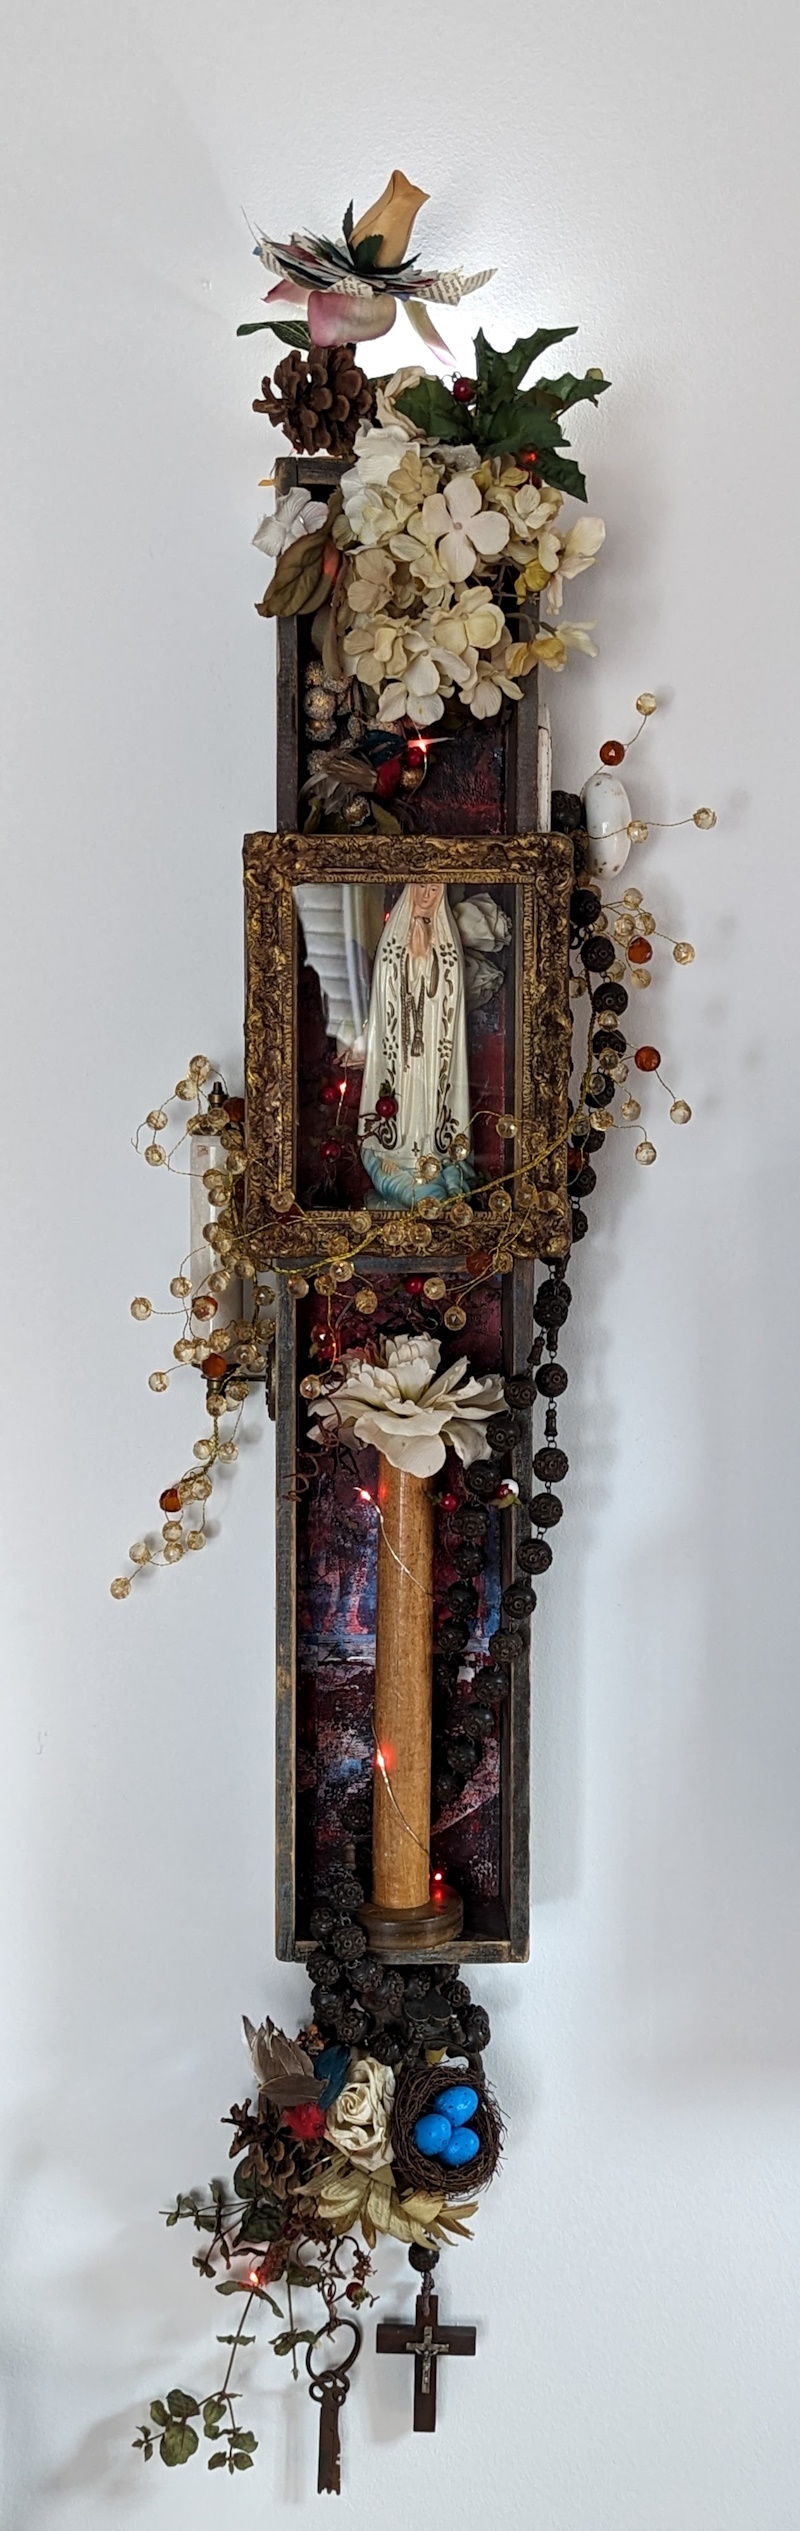 This sculpture is a journey in a box: inspired by "The Miracle of Our Lady of Fatima." Elements of nature such as leaves and branches create a backdrop for a reflective, mindful walk through the woods, echoing themes of tranquility and discovery.